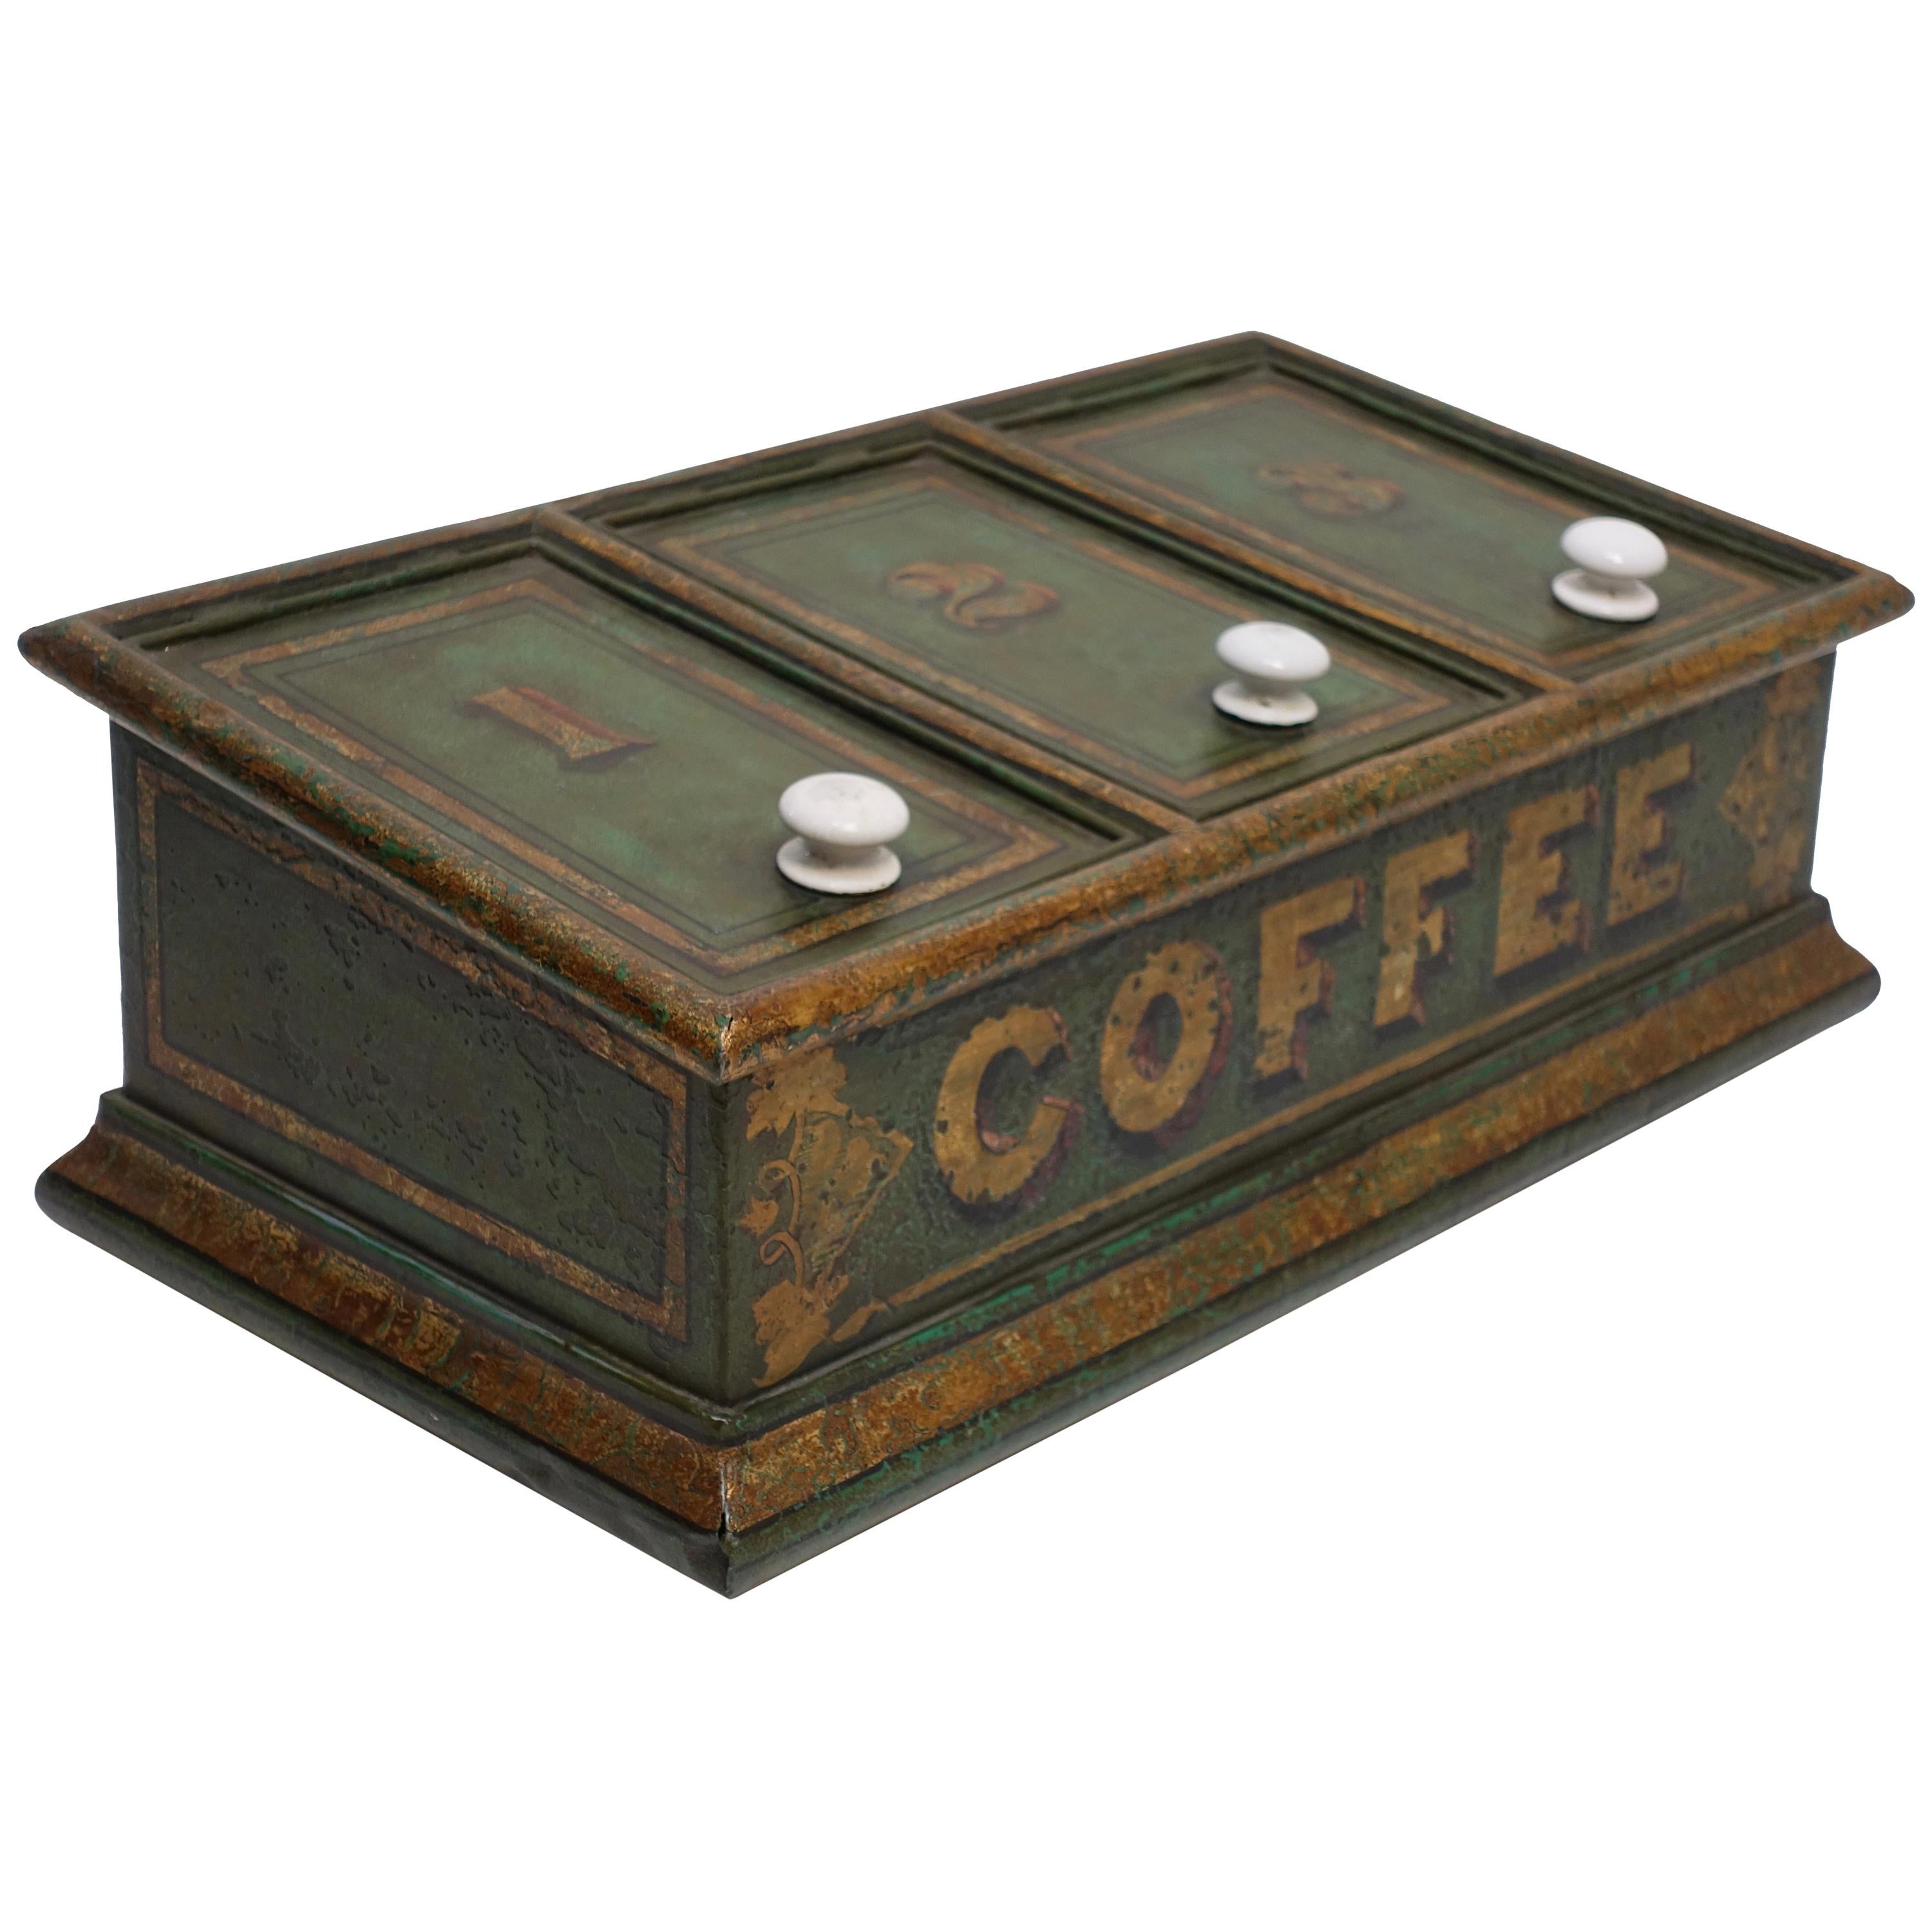 Green Tole Painted Coffee Bin Store Display Dispenser, England, 19th Century